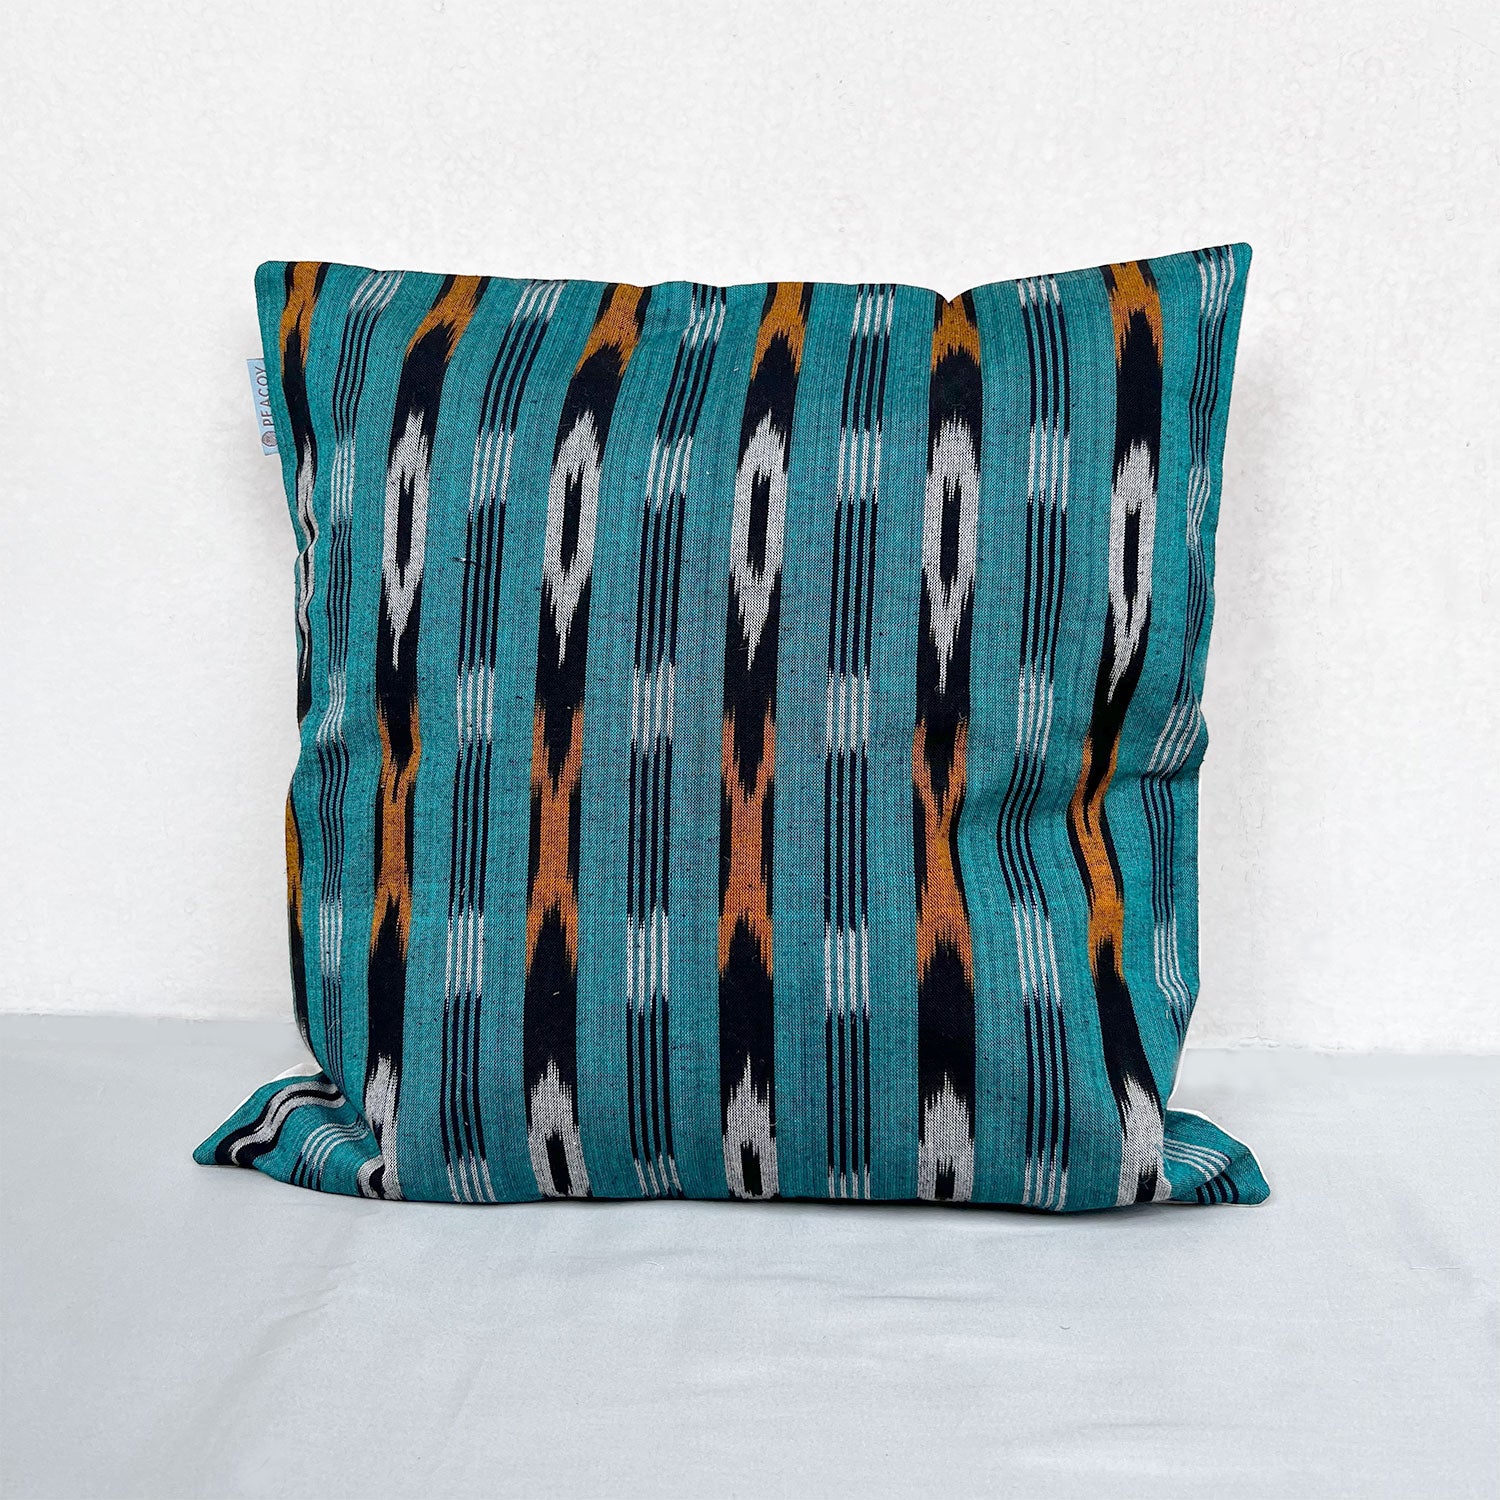 Sea Blue Patterned Pure Cotton Cushion Cover - 16 x 16 inches